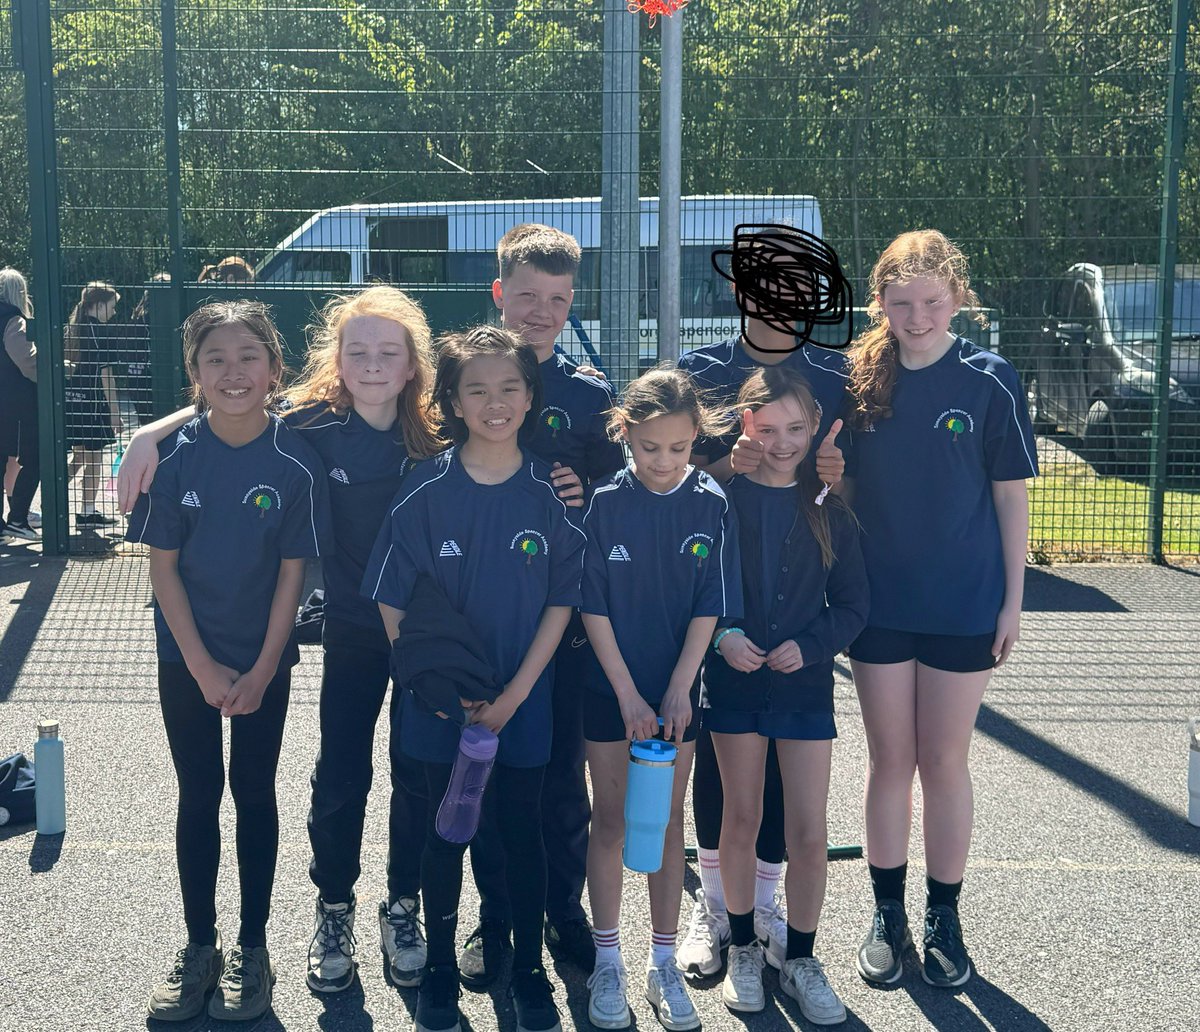 What amazing children we have at Sunnyside! Teachers from other schools complimented how polite and great sportsmanship our children have. As a team, we worked well together at our netball tournament! Thank you to the sport’s leaders @George_Spencer for hosting this event!